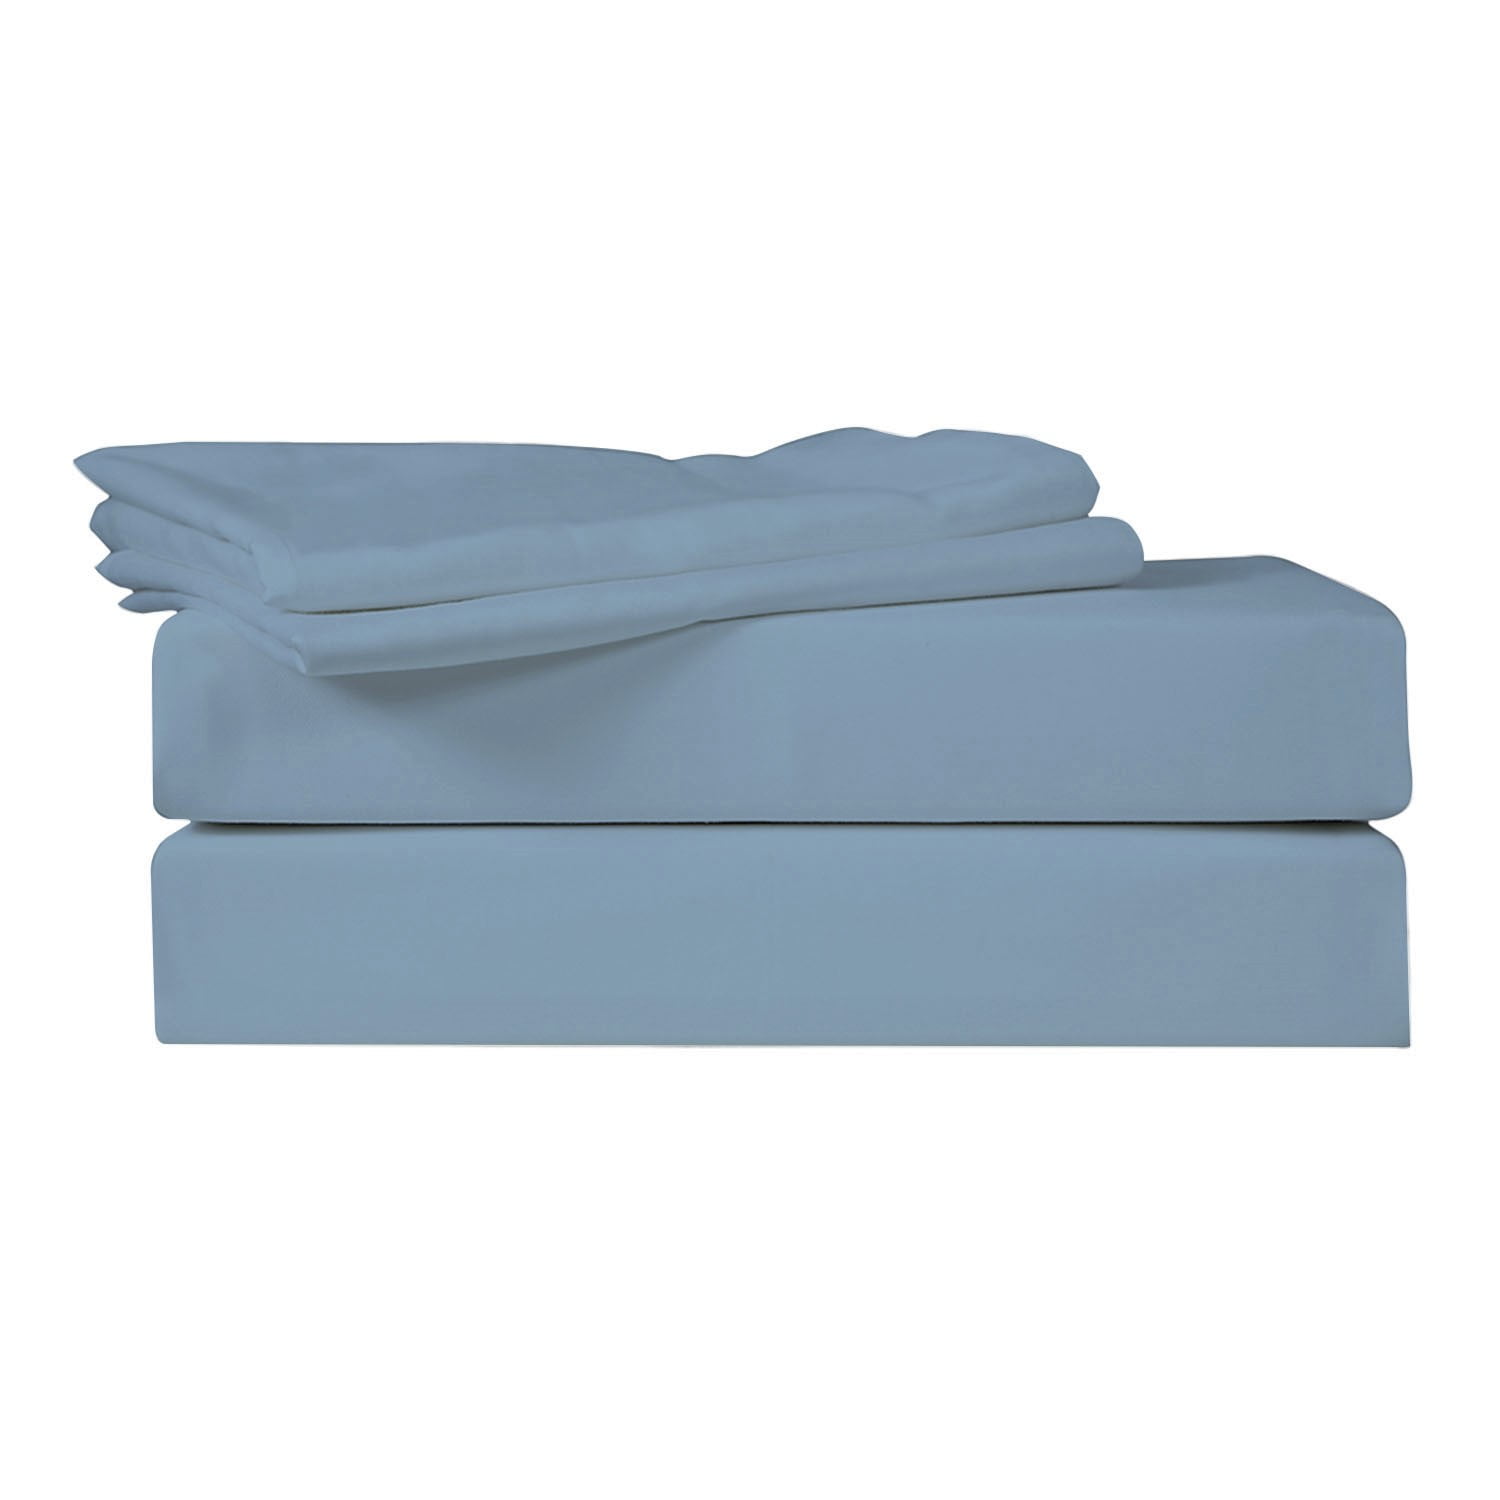 Details about   Sky Blue Solid Bedding Collection 1000 TC Egyptian Cotton US Size Select Item 